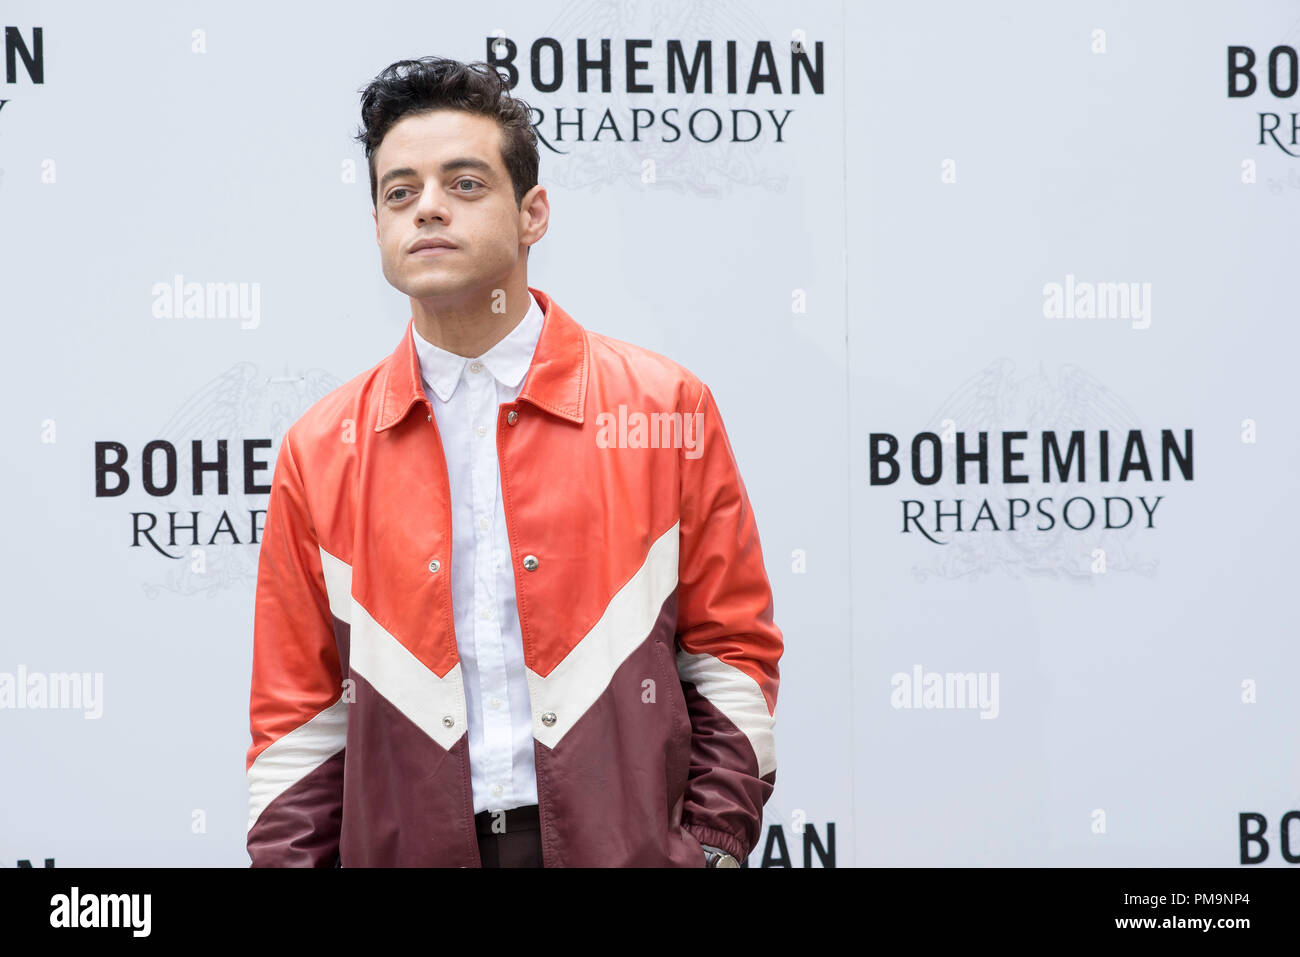 Rome, Italy. 18th Sep 2018. Rami Malek attending the photocall of Bohemian  Rhapsody at Hotel De Russie in Rome Credit: Silvia Gerbino/Alamy Live News  Stock Photo - Alamy